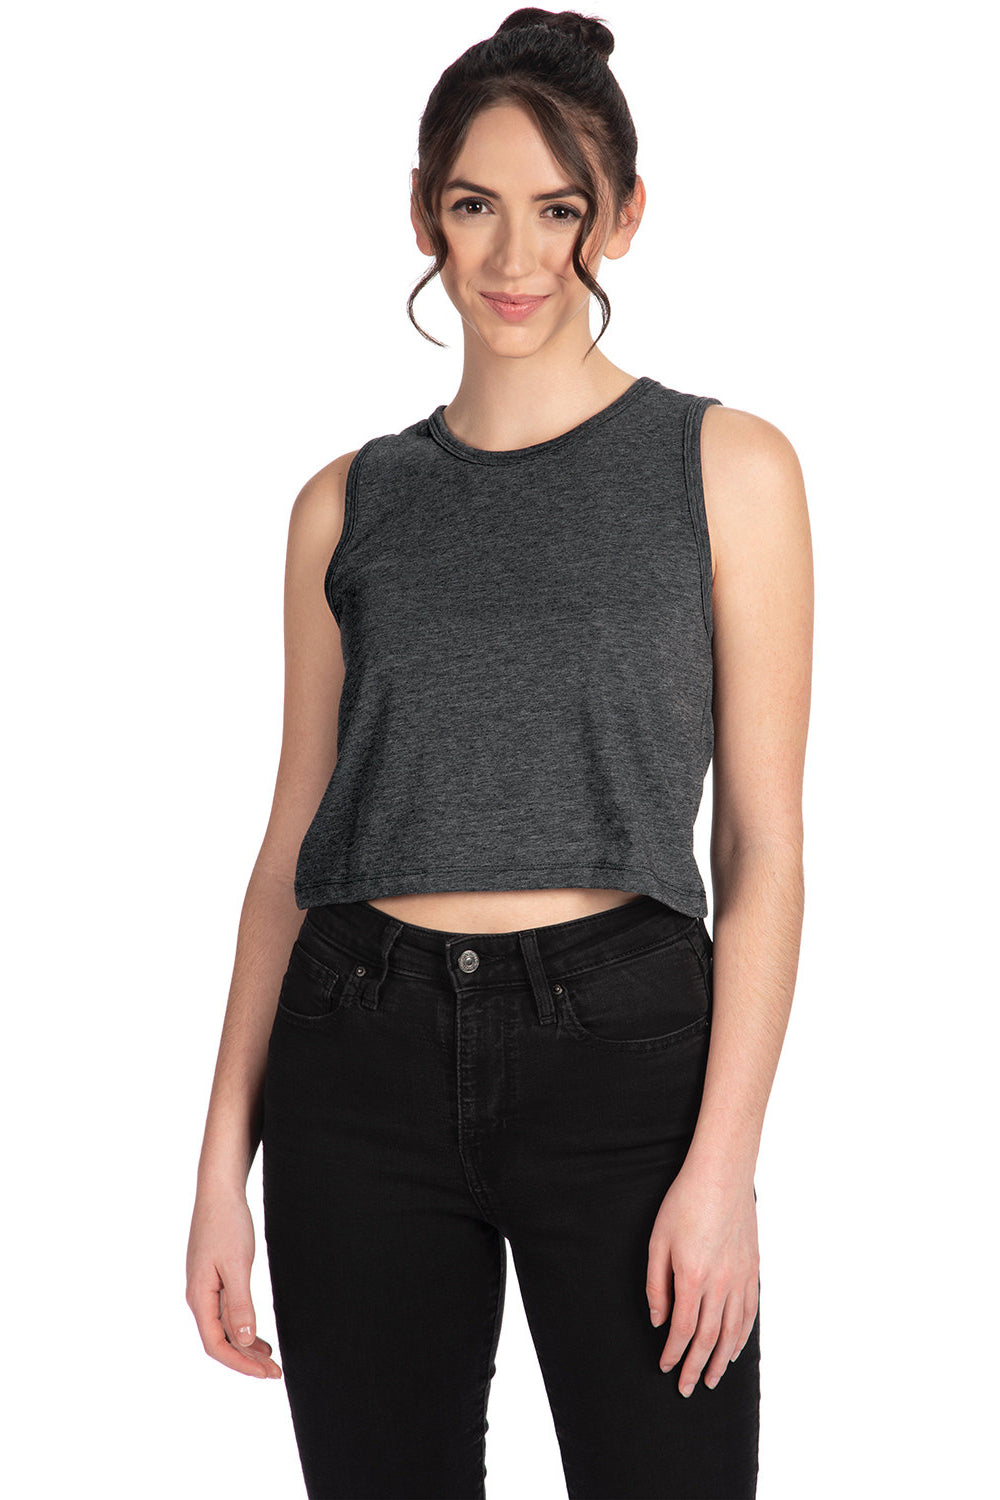 Next Level 5083 Womens Festival Cropped Tank Top Charcoal Grey Front